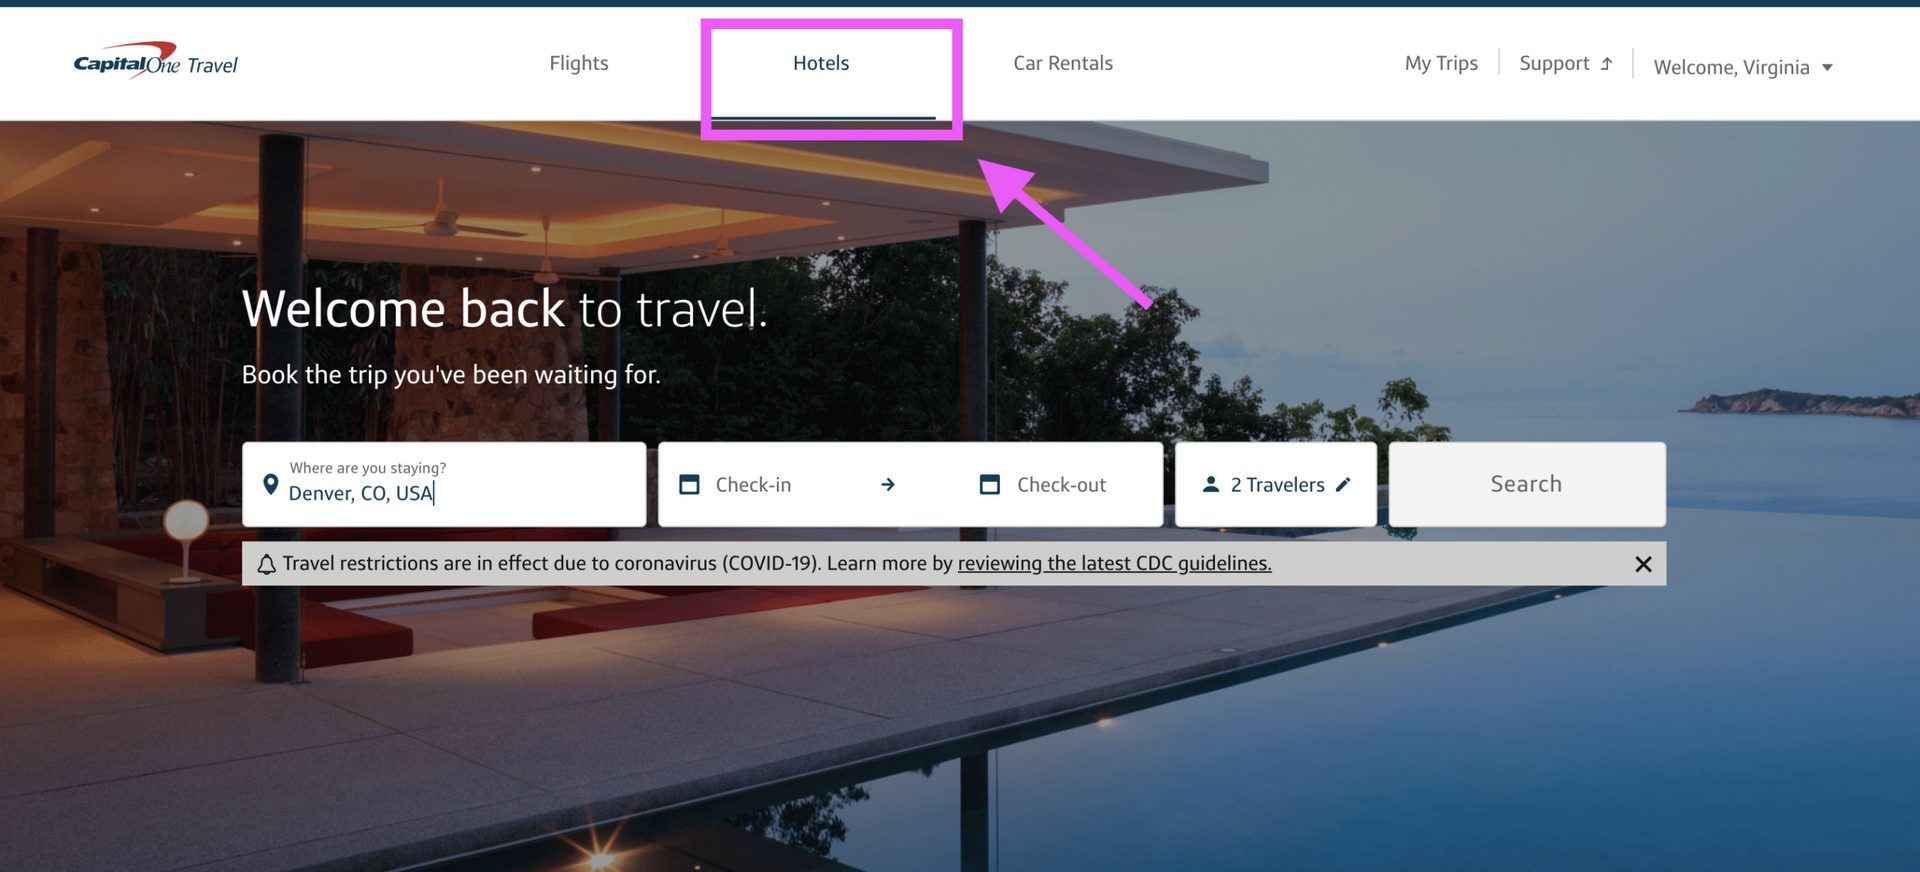 Capital One Travel Portal_Hotel Booking